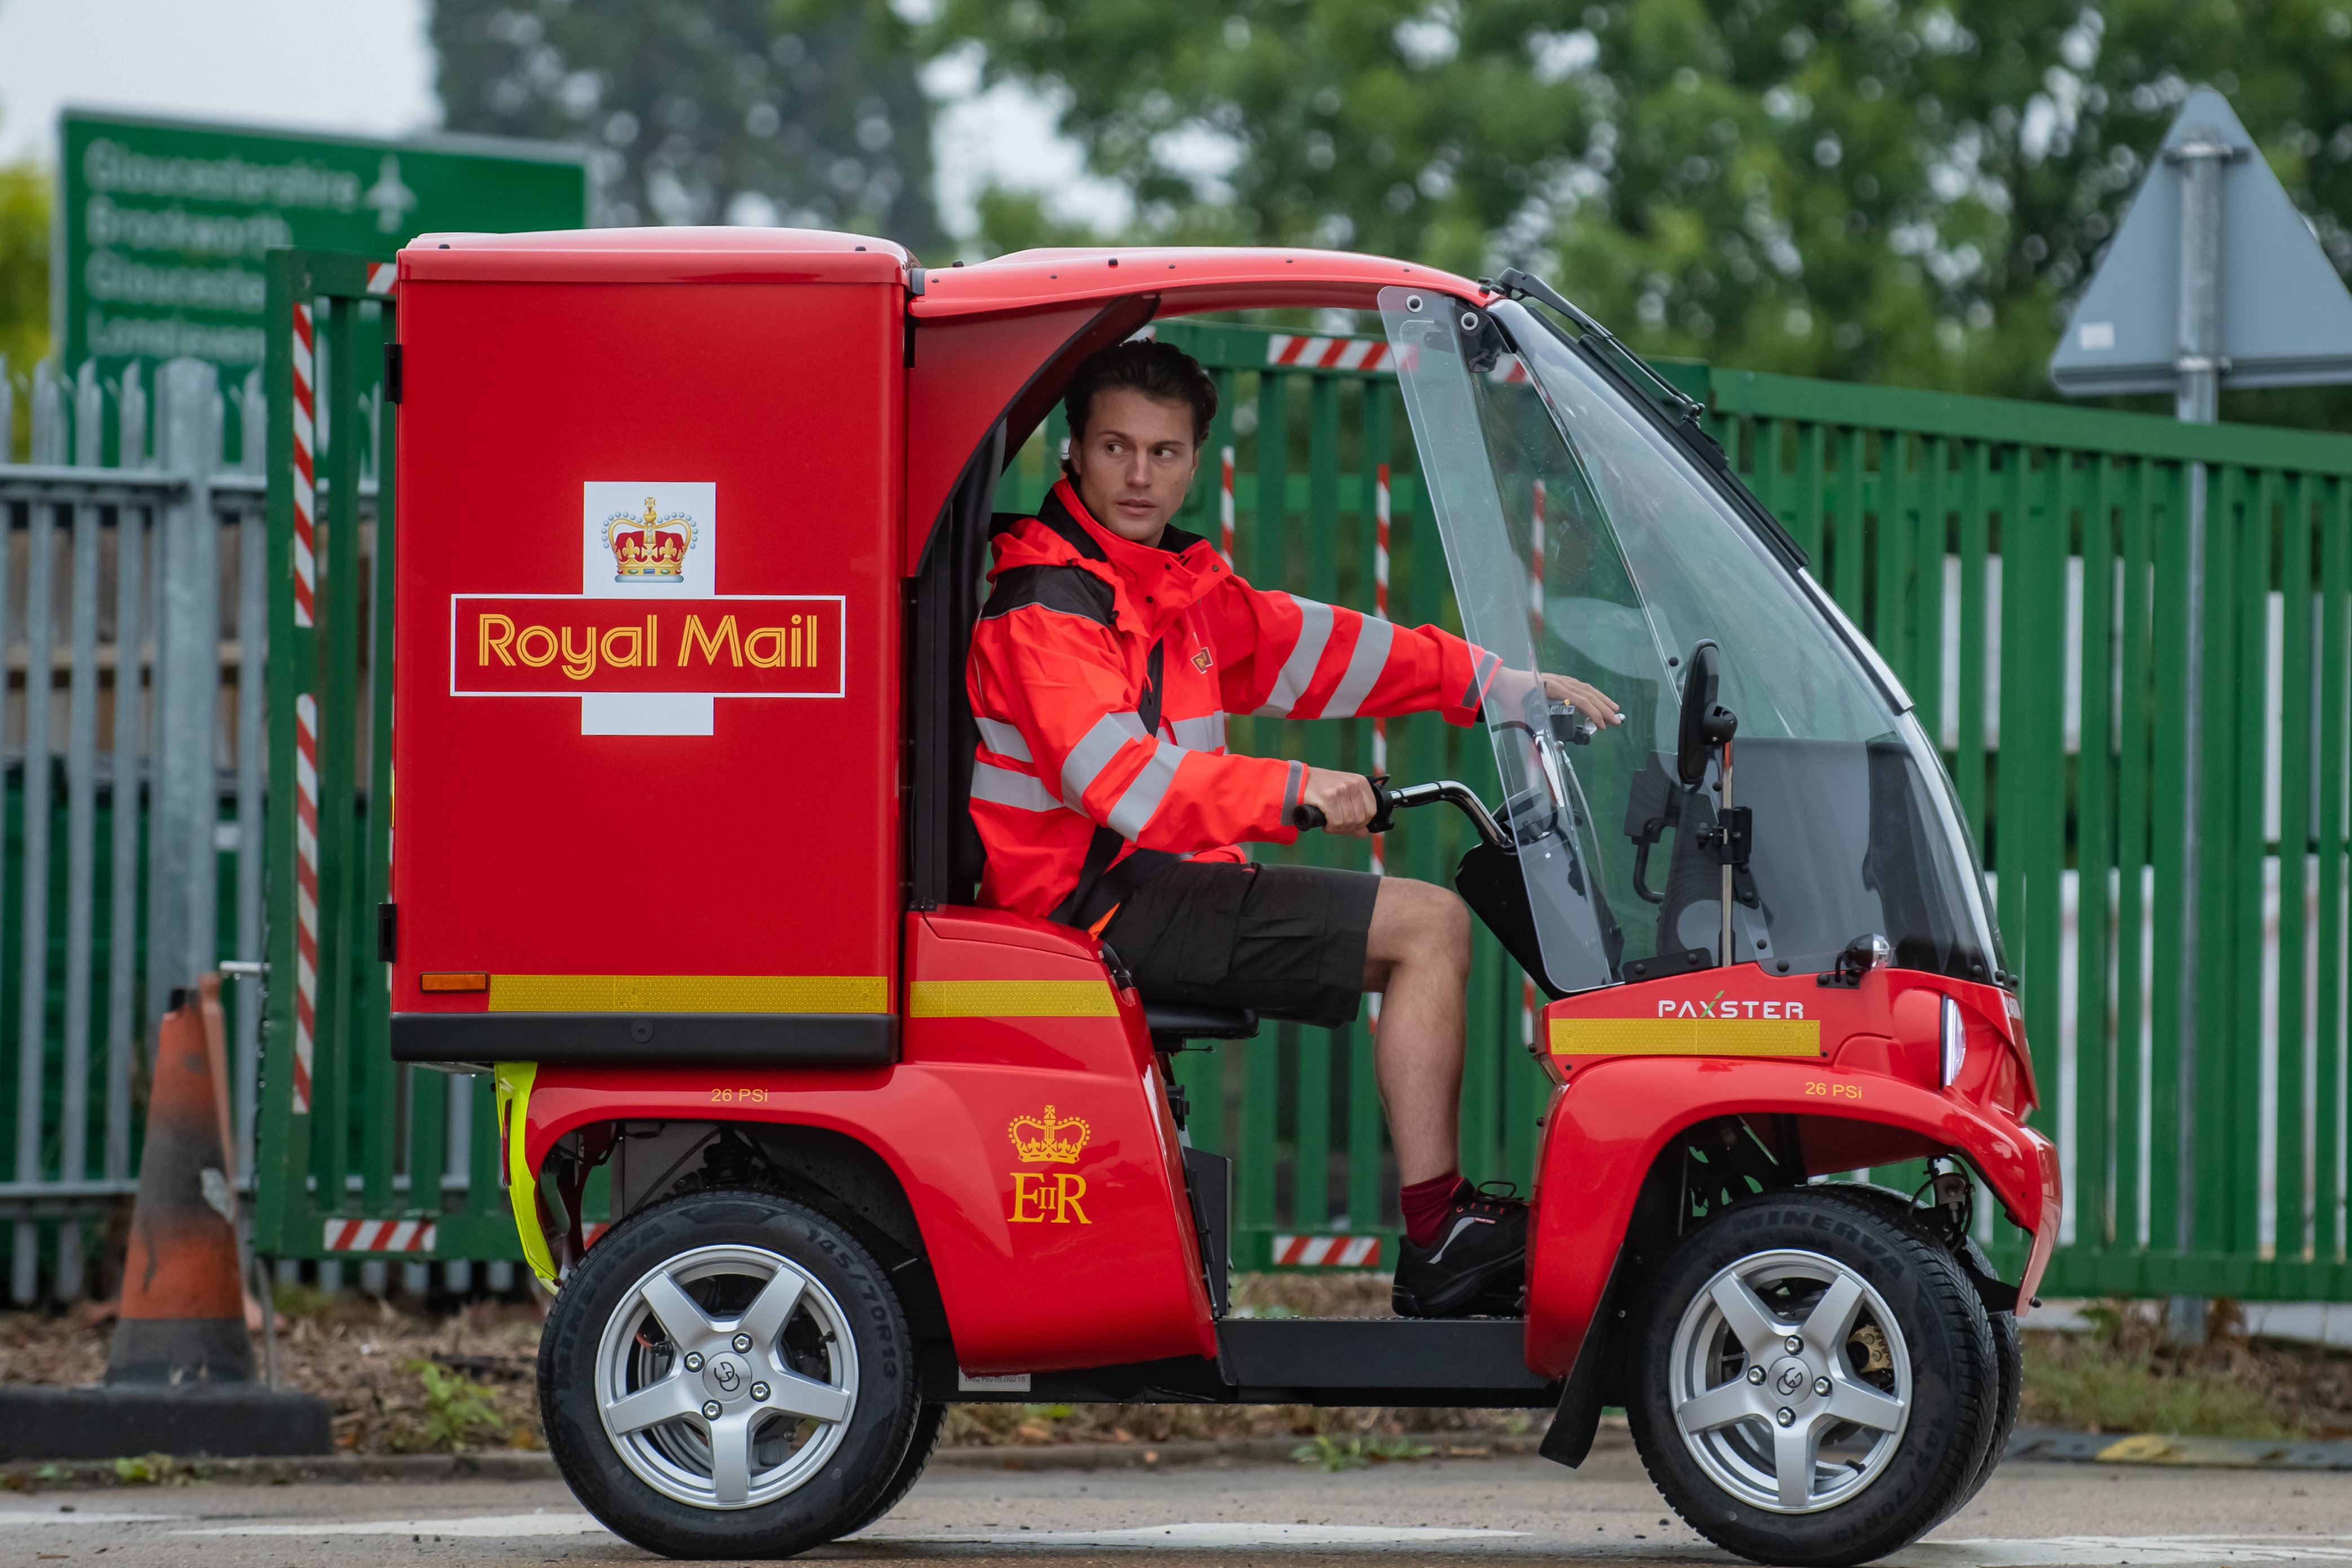 Royal Mail to trial small electric vehicles to deliver the mail